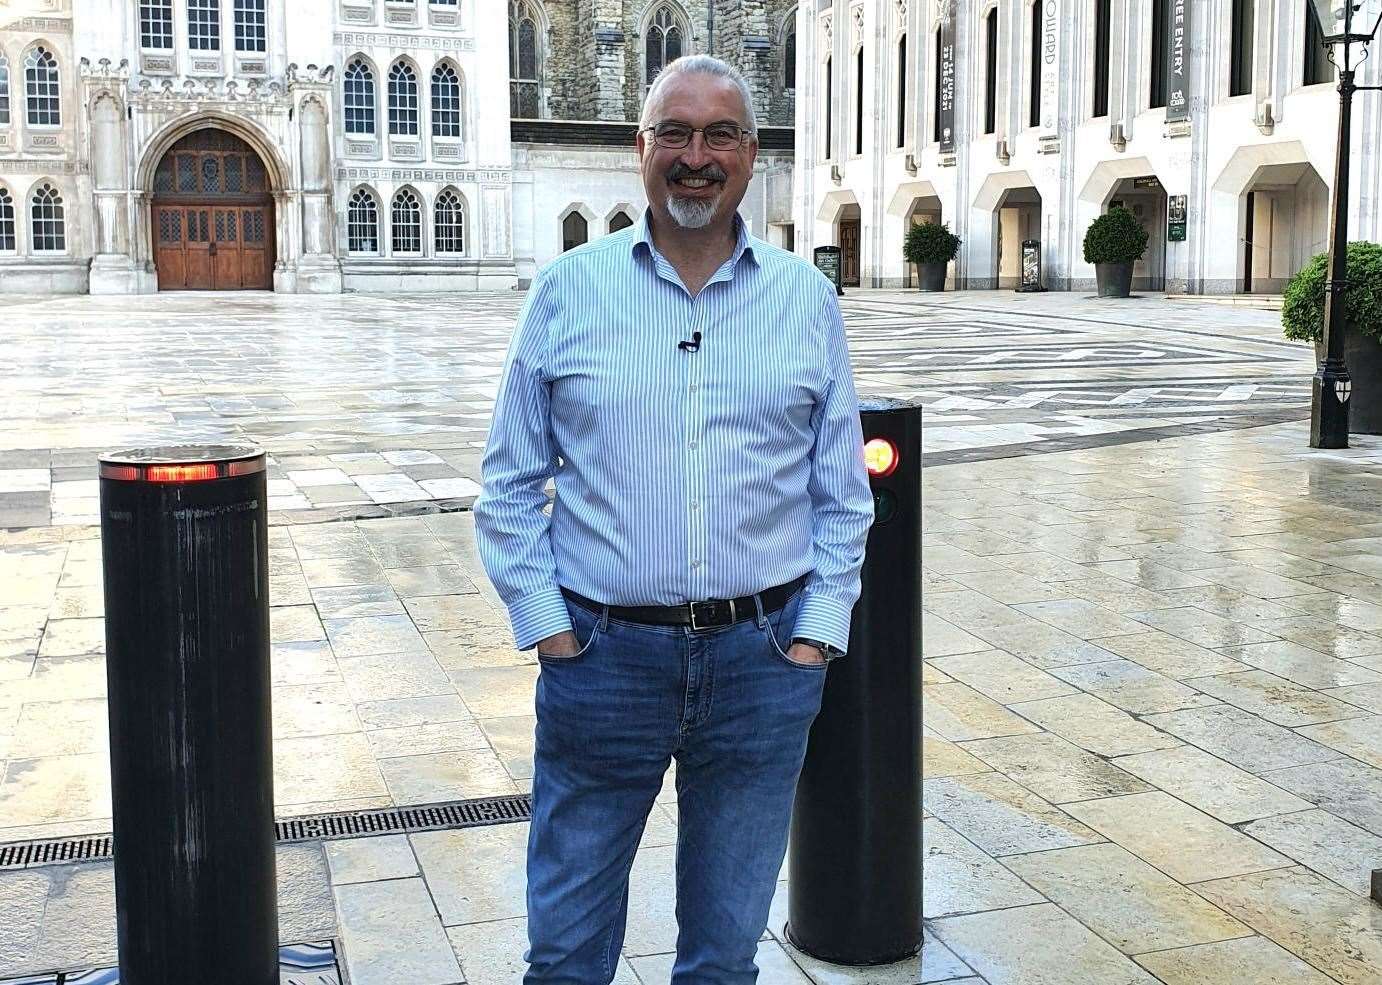 Dr Simon Elliott at the Guildhall courtyard in the City of London, standing above the Roman amphitheatre